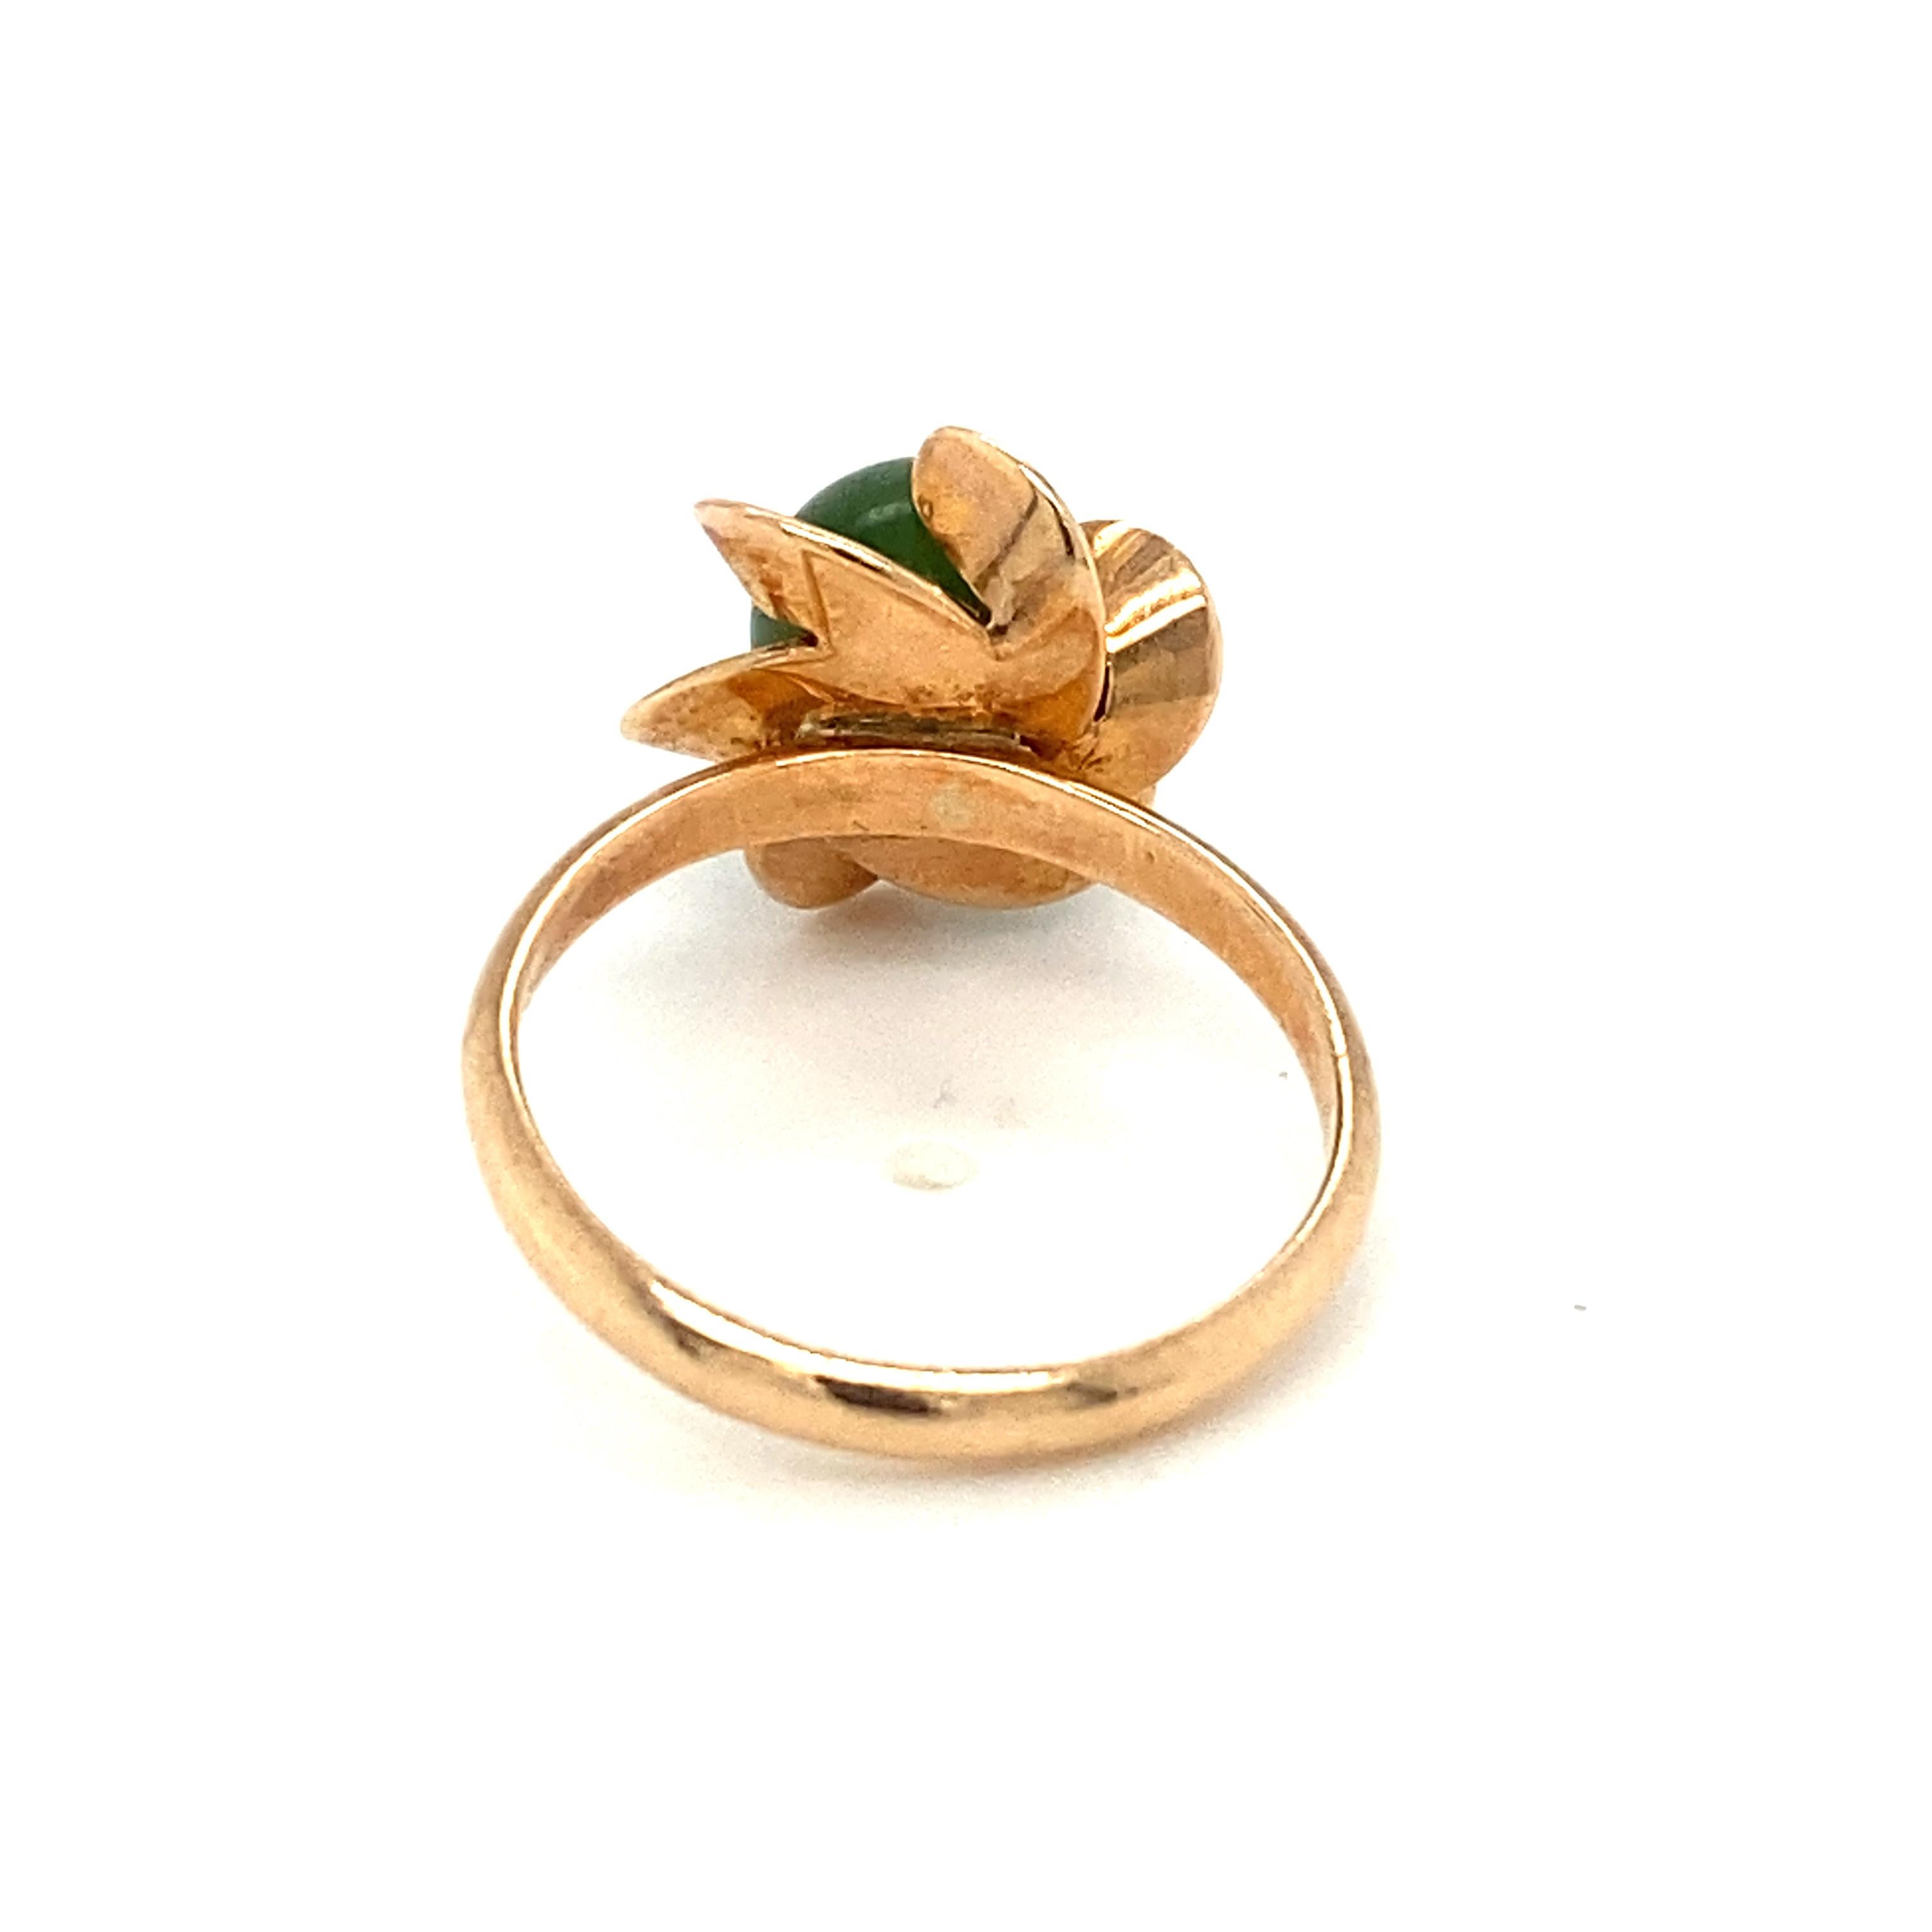 Item Details: This mid-century ring has a round green jade stone and a scalloped setting.

Circa: 1950s
Metal Type: 18 Karat Yellow gold
Weight: 3.1 grams
Size: US 6, resizable